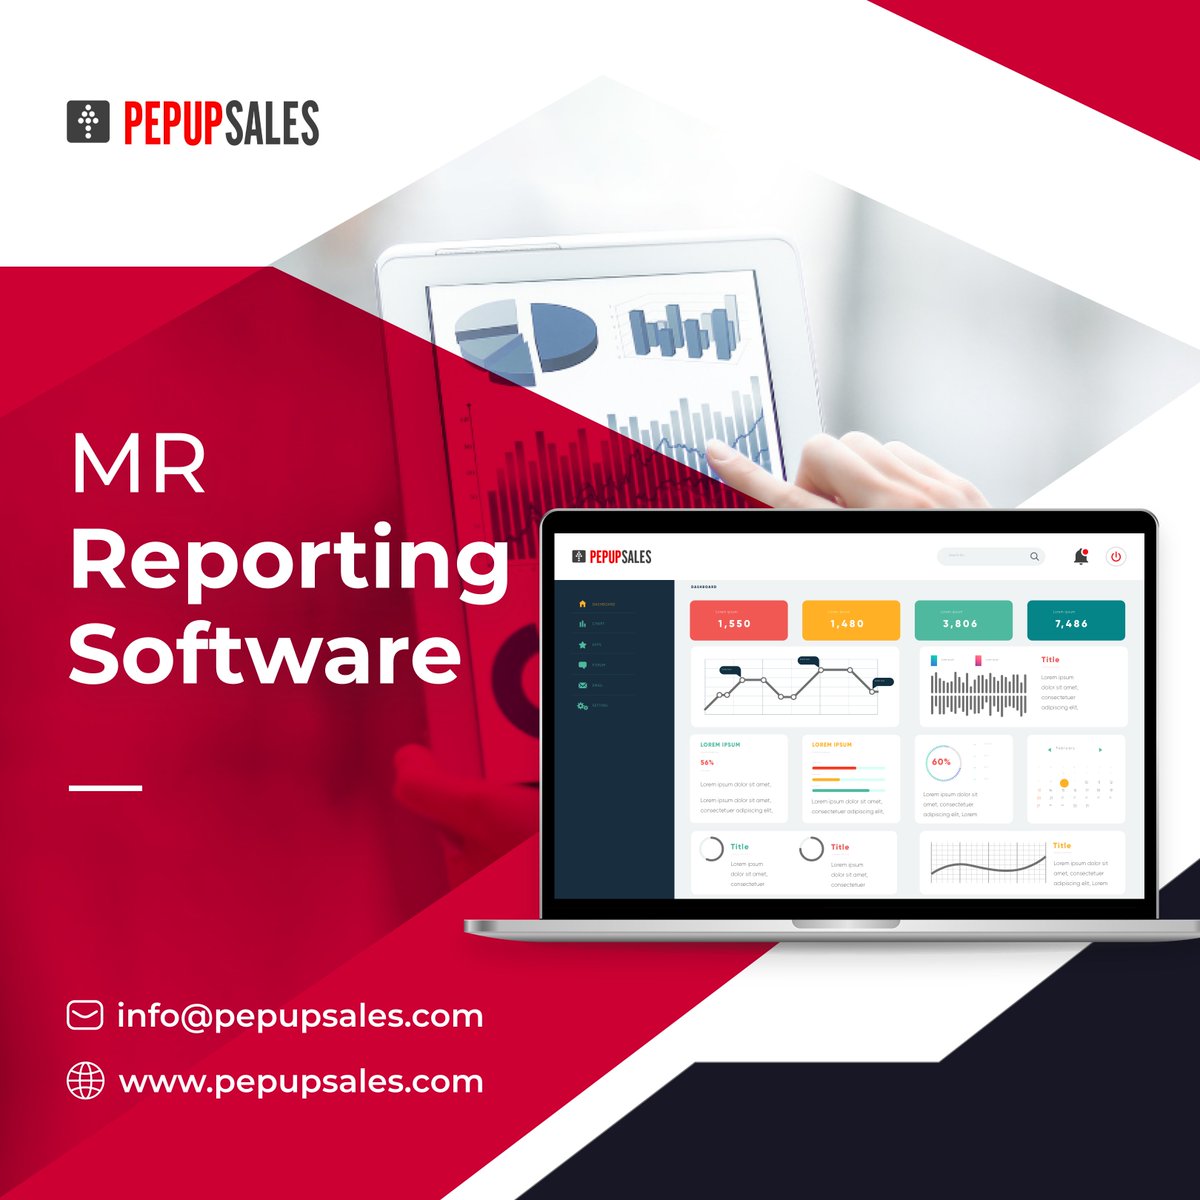 @Pepupsales #MRReportingSoftware is specially designed for the #pharma industry to manage their Inventory, Sales, Orders, Accounting, Location Tracking, Customer Visit & many more.

Try Free Demo Now - bit.ly/3q9YyB4

#MRreportingsoftware #Pharmaceutical #SFA #pharmacy